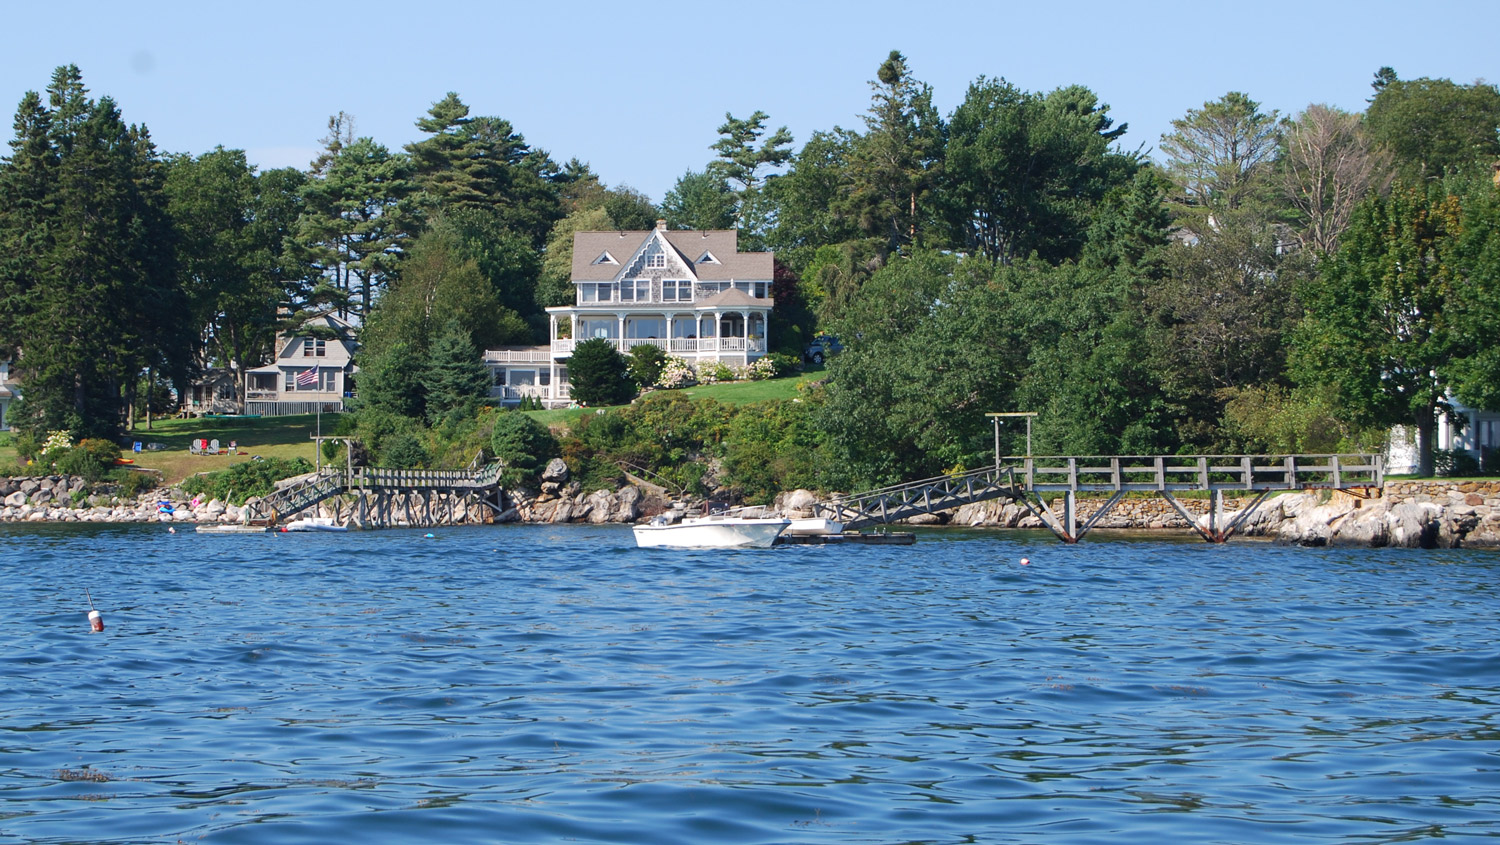 Real Estate Houses For Sale Boothbay Harbor Maine Carol Buxton